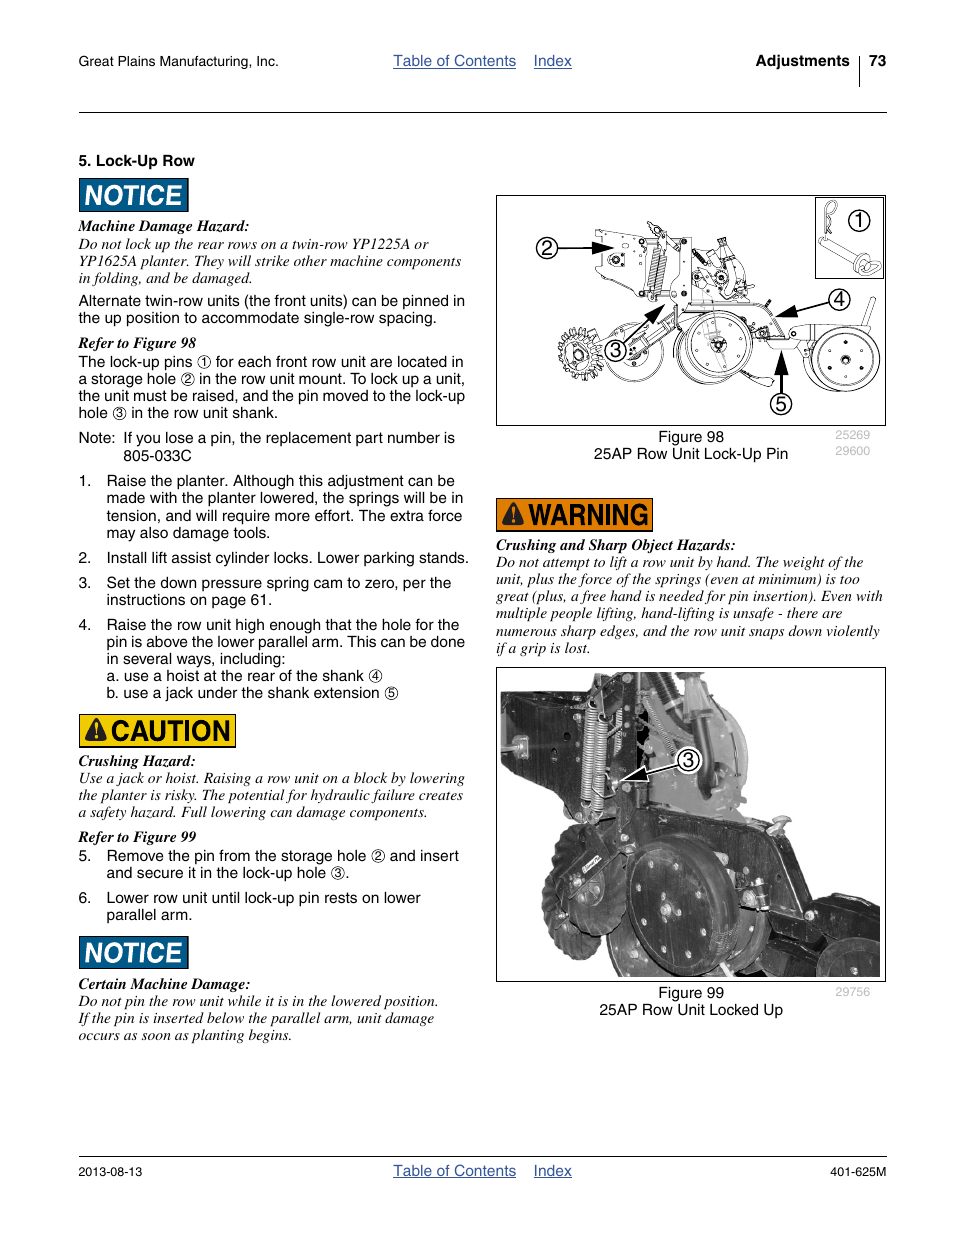 Lock-up row | Great Plains YP1625A Operator Manual User Manual | Page 77 / 172